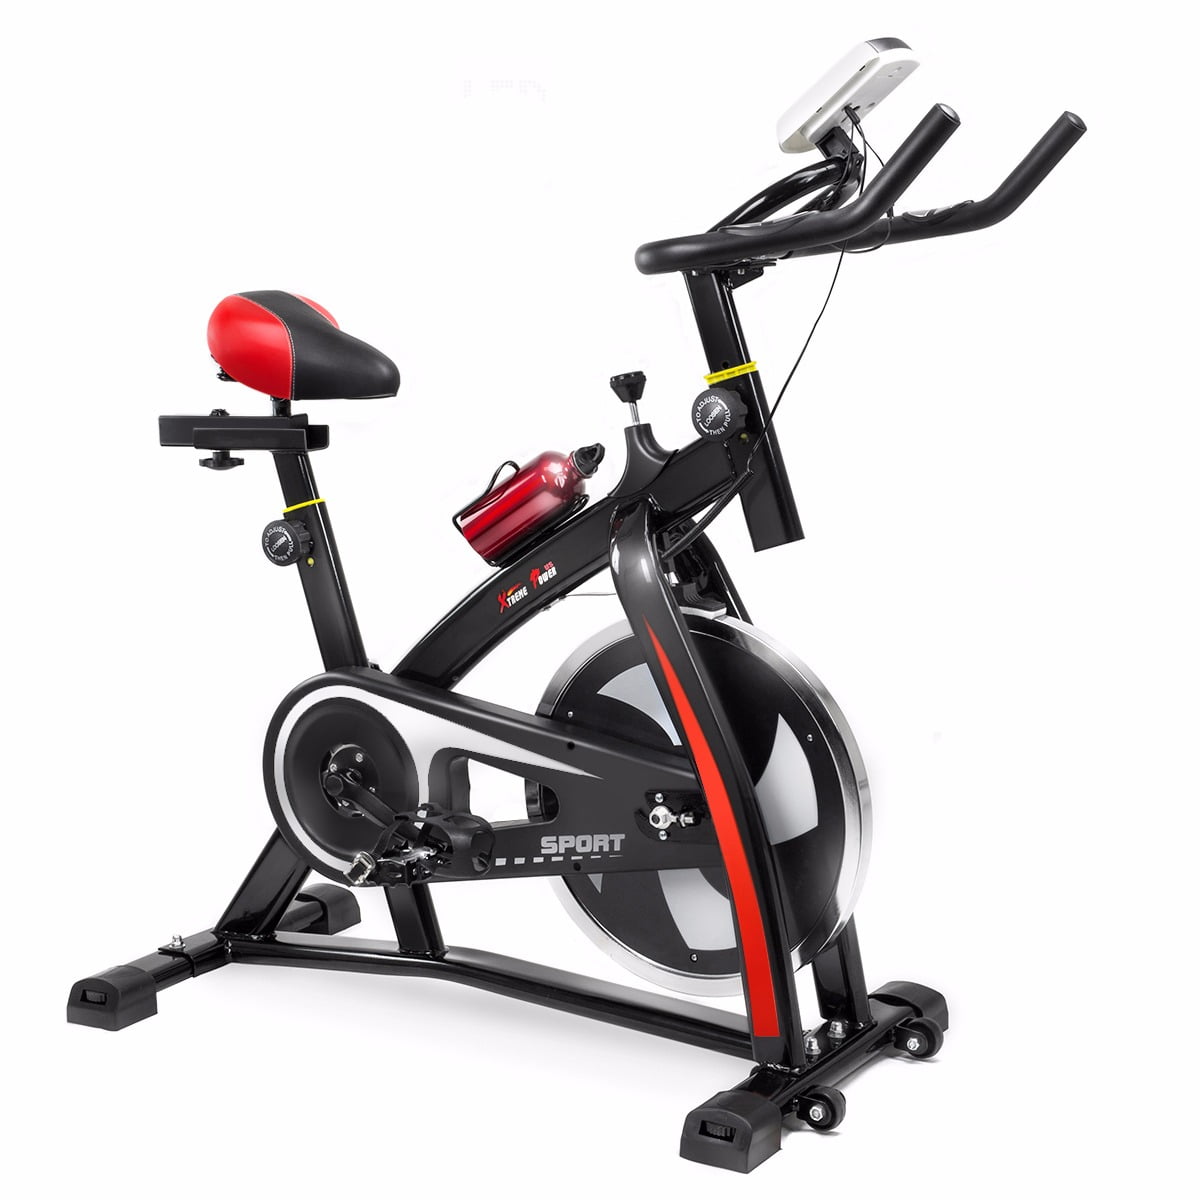 Bicycle Cycling Fitness Exercise Stationary Bike Cardio Workout Home Indoor USA 